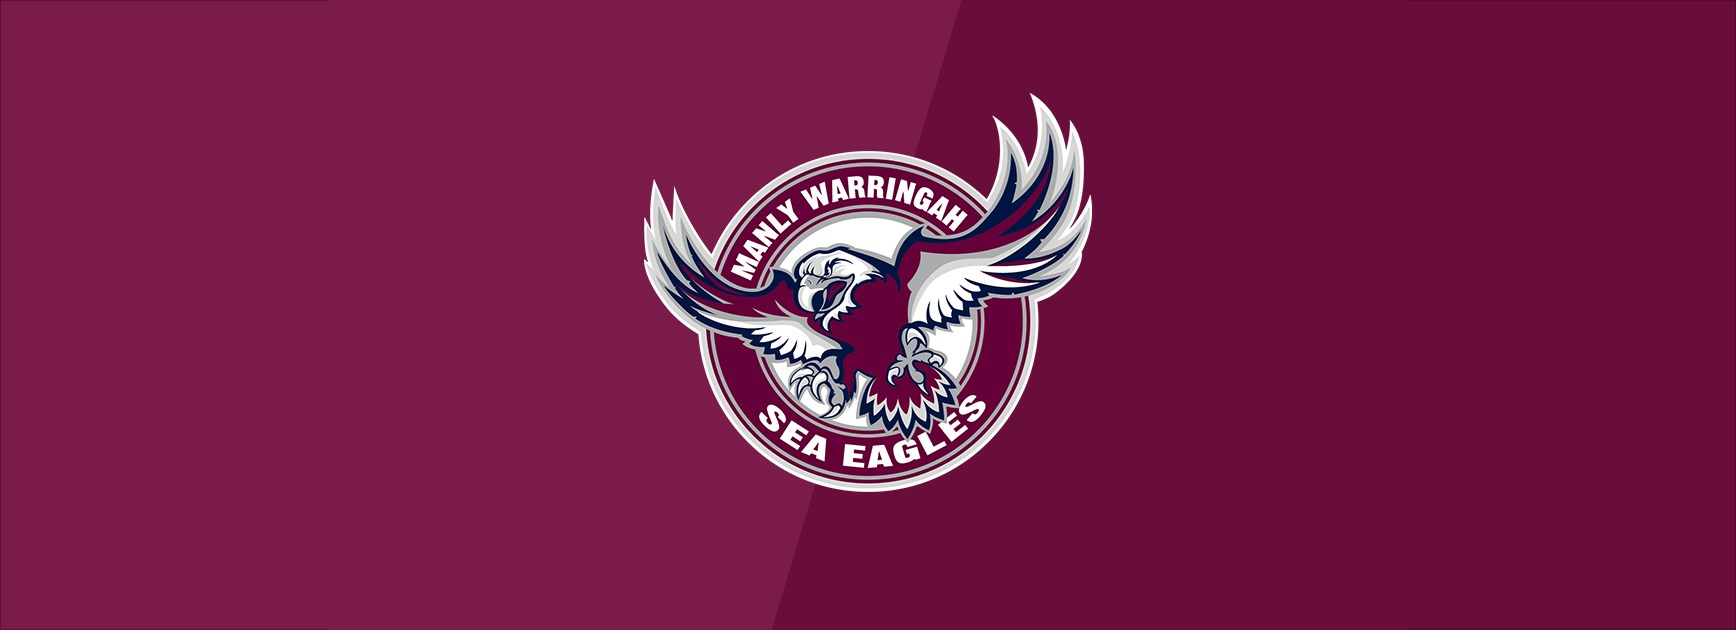 Rd 2: Sea Eagles vs Roosters